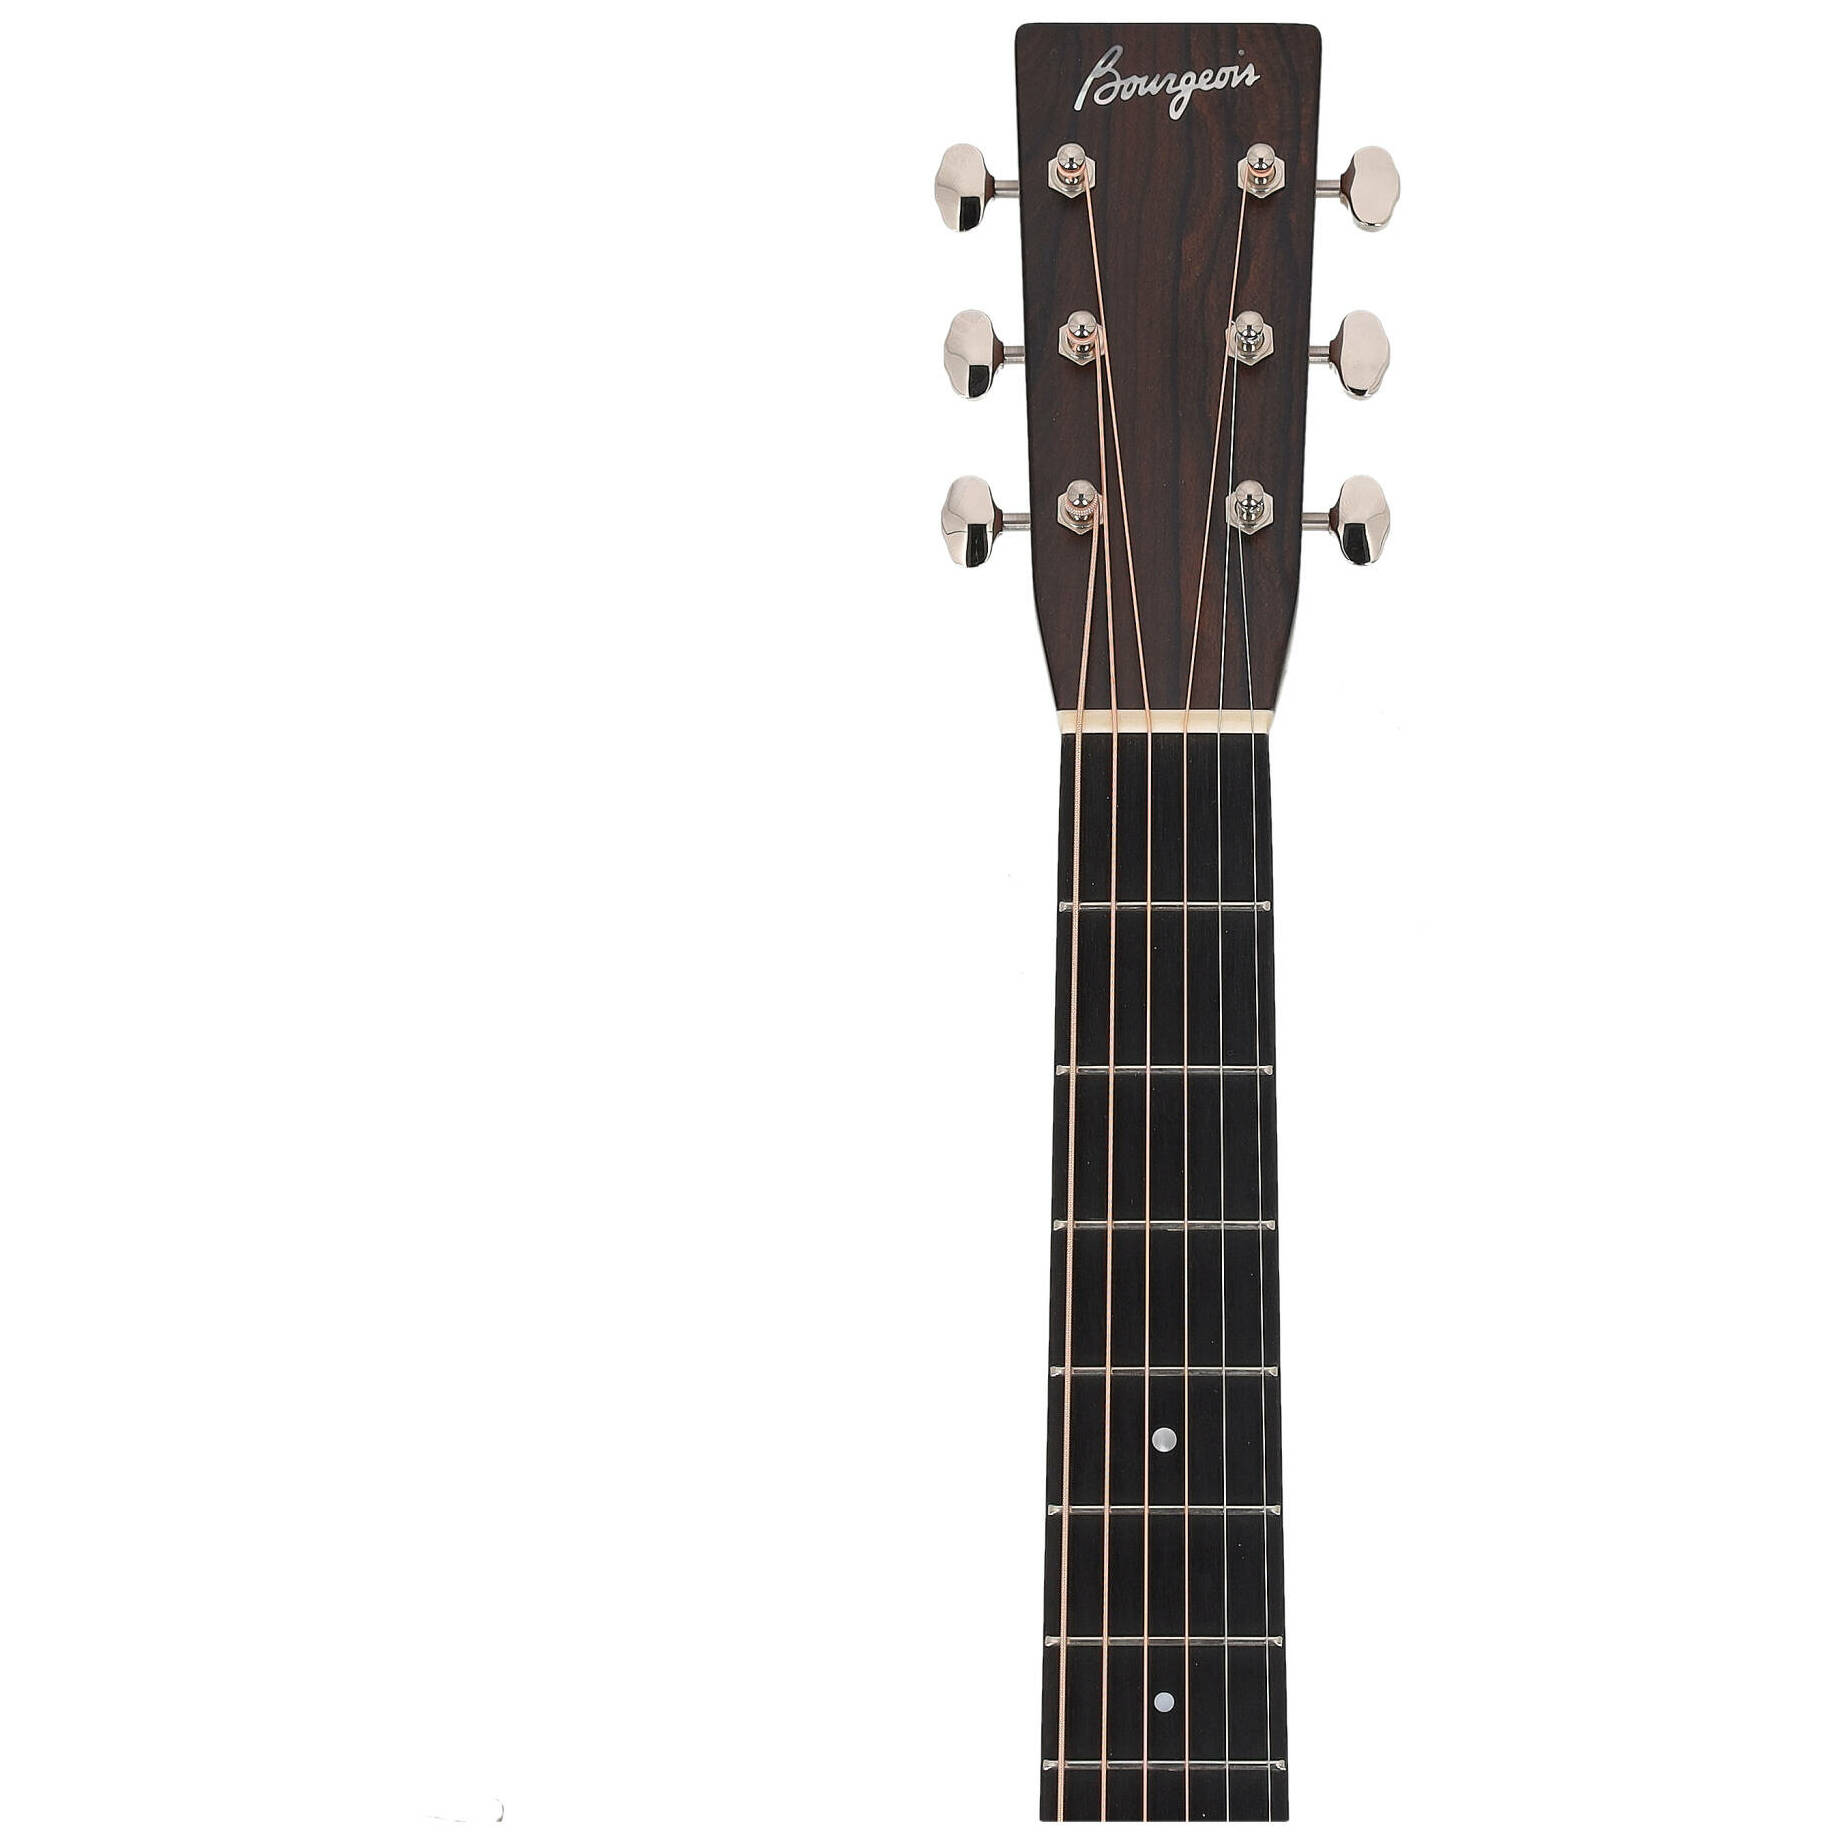 Bourgeois Guitars OM CountryBoy Touchstone 5